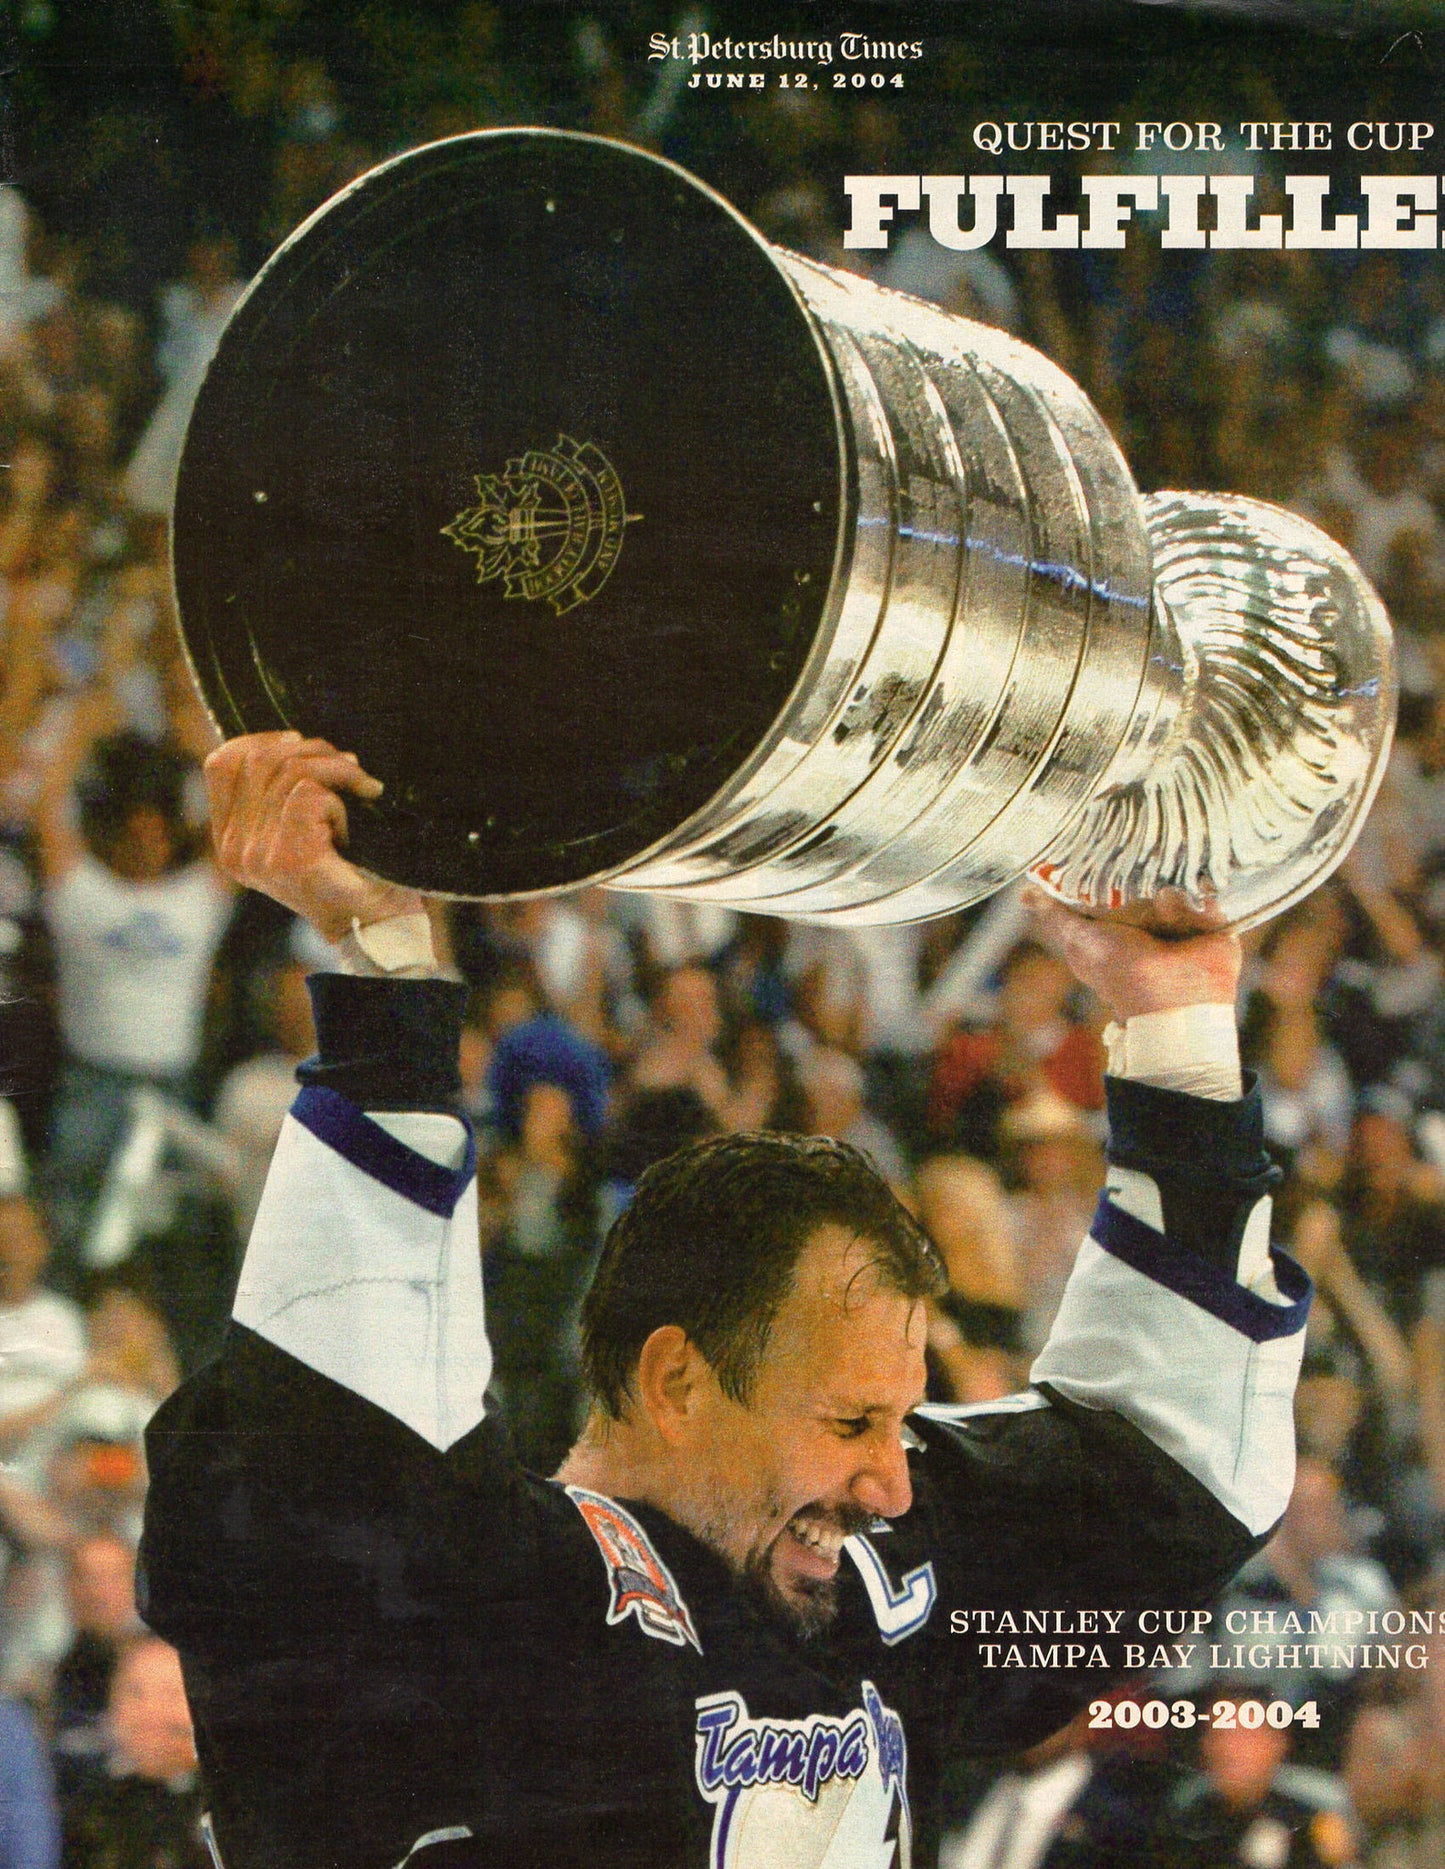 2004.06.12 St Pete Times Stanley Cup Champions